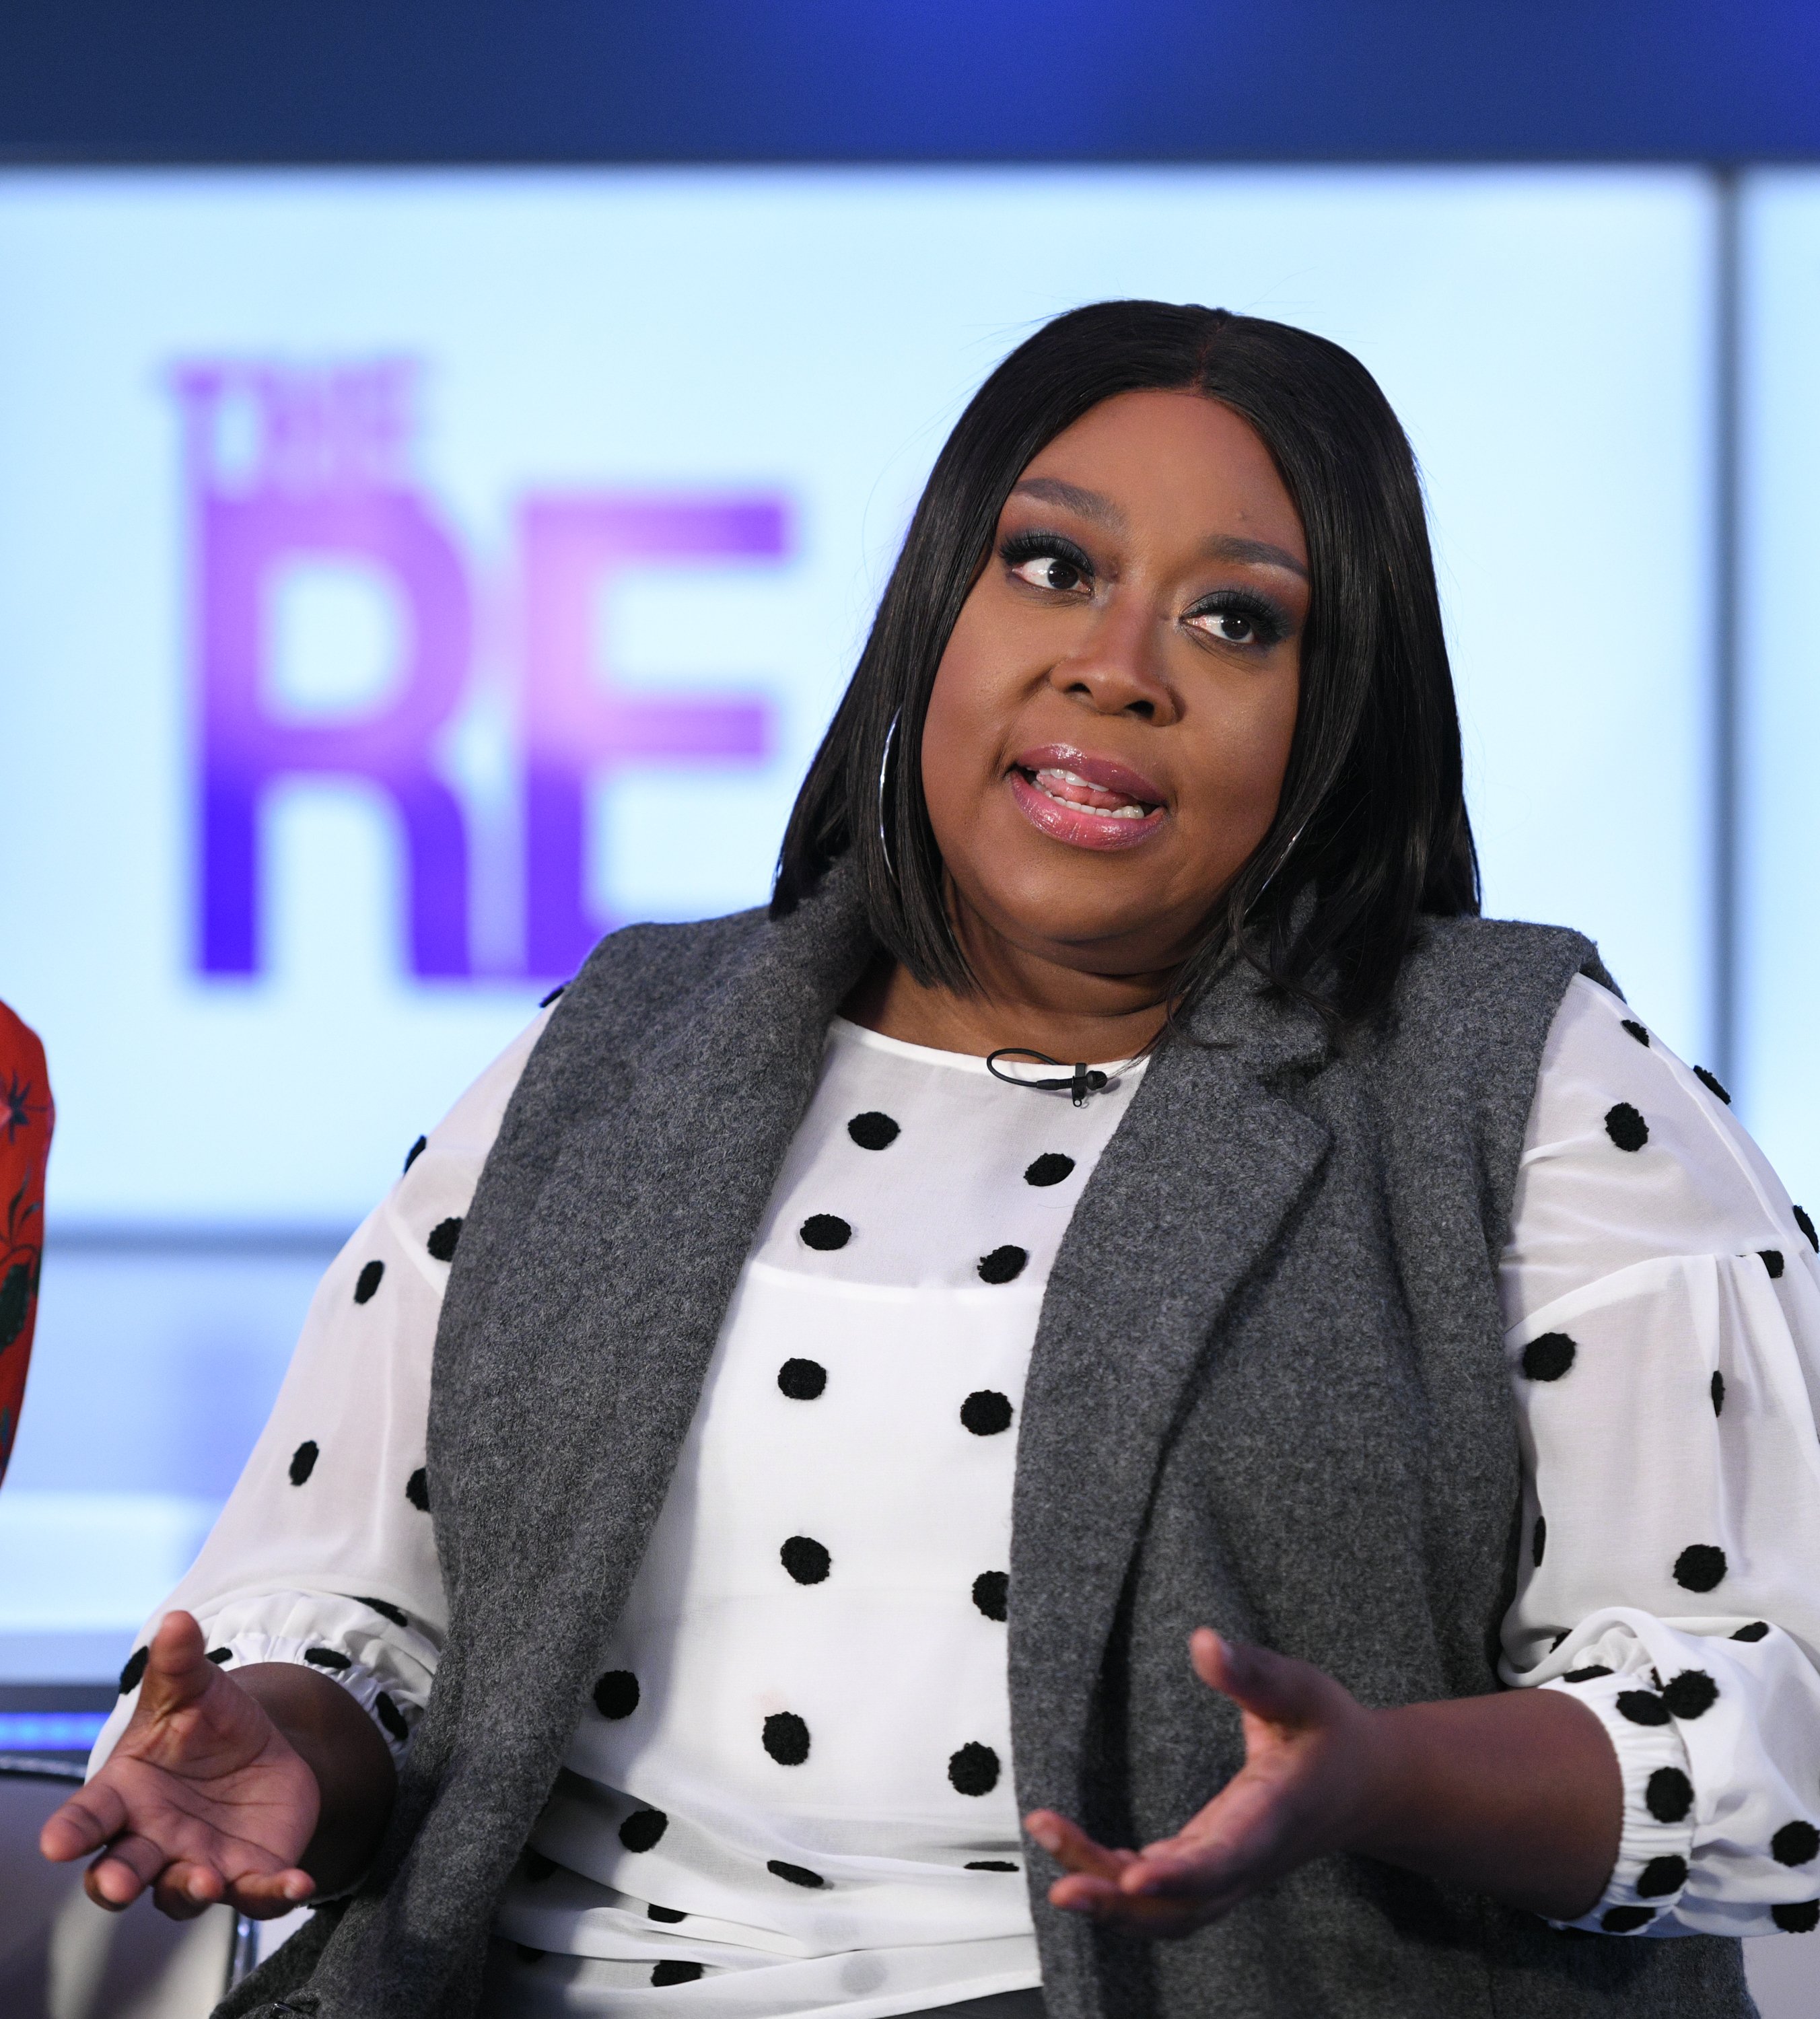 Loni Love during a visit to "Extra" at Burbank Studios in November 2019. | Photo: Getty Images